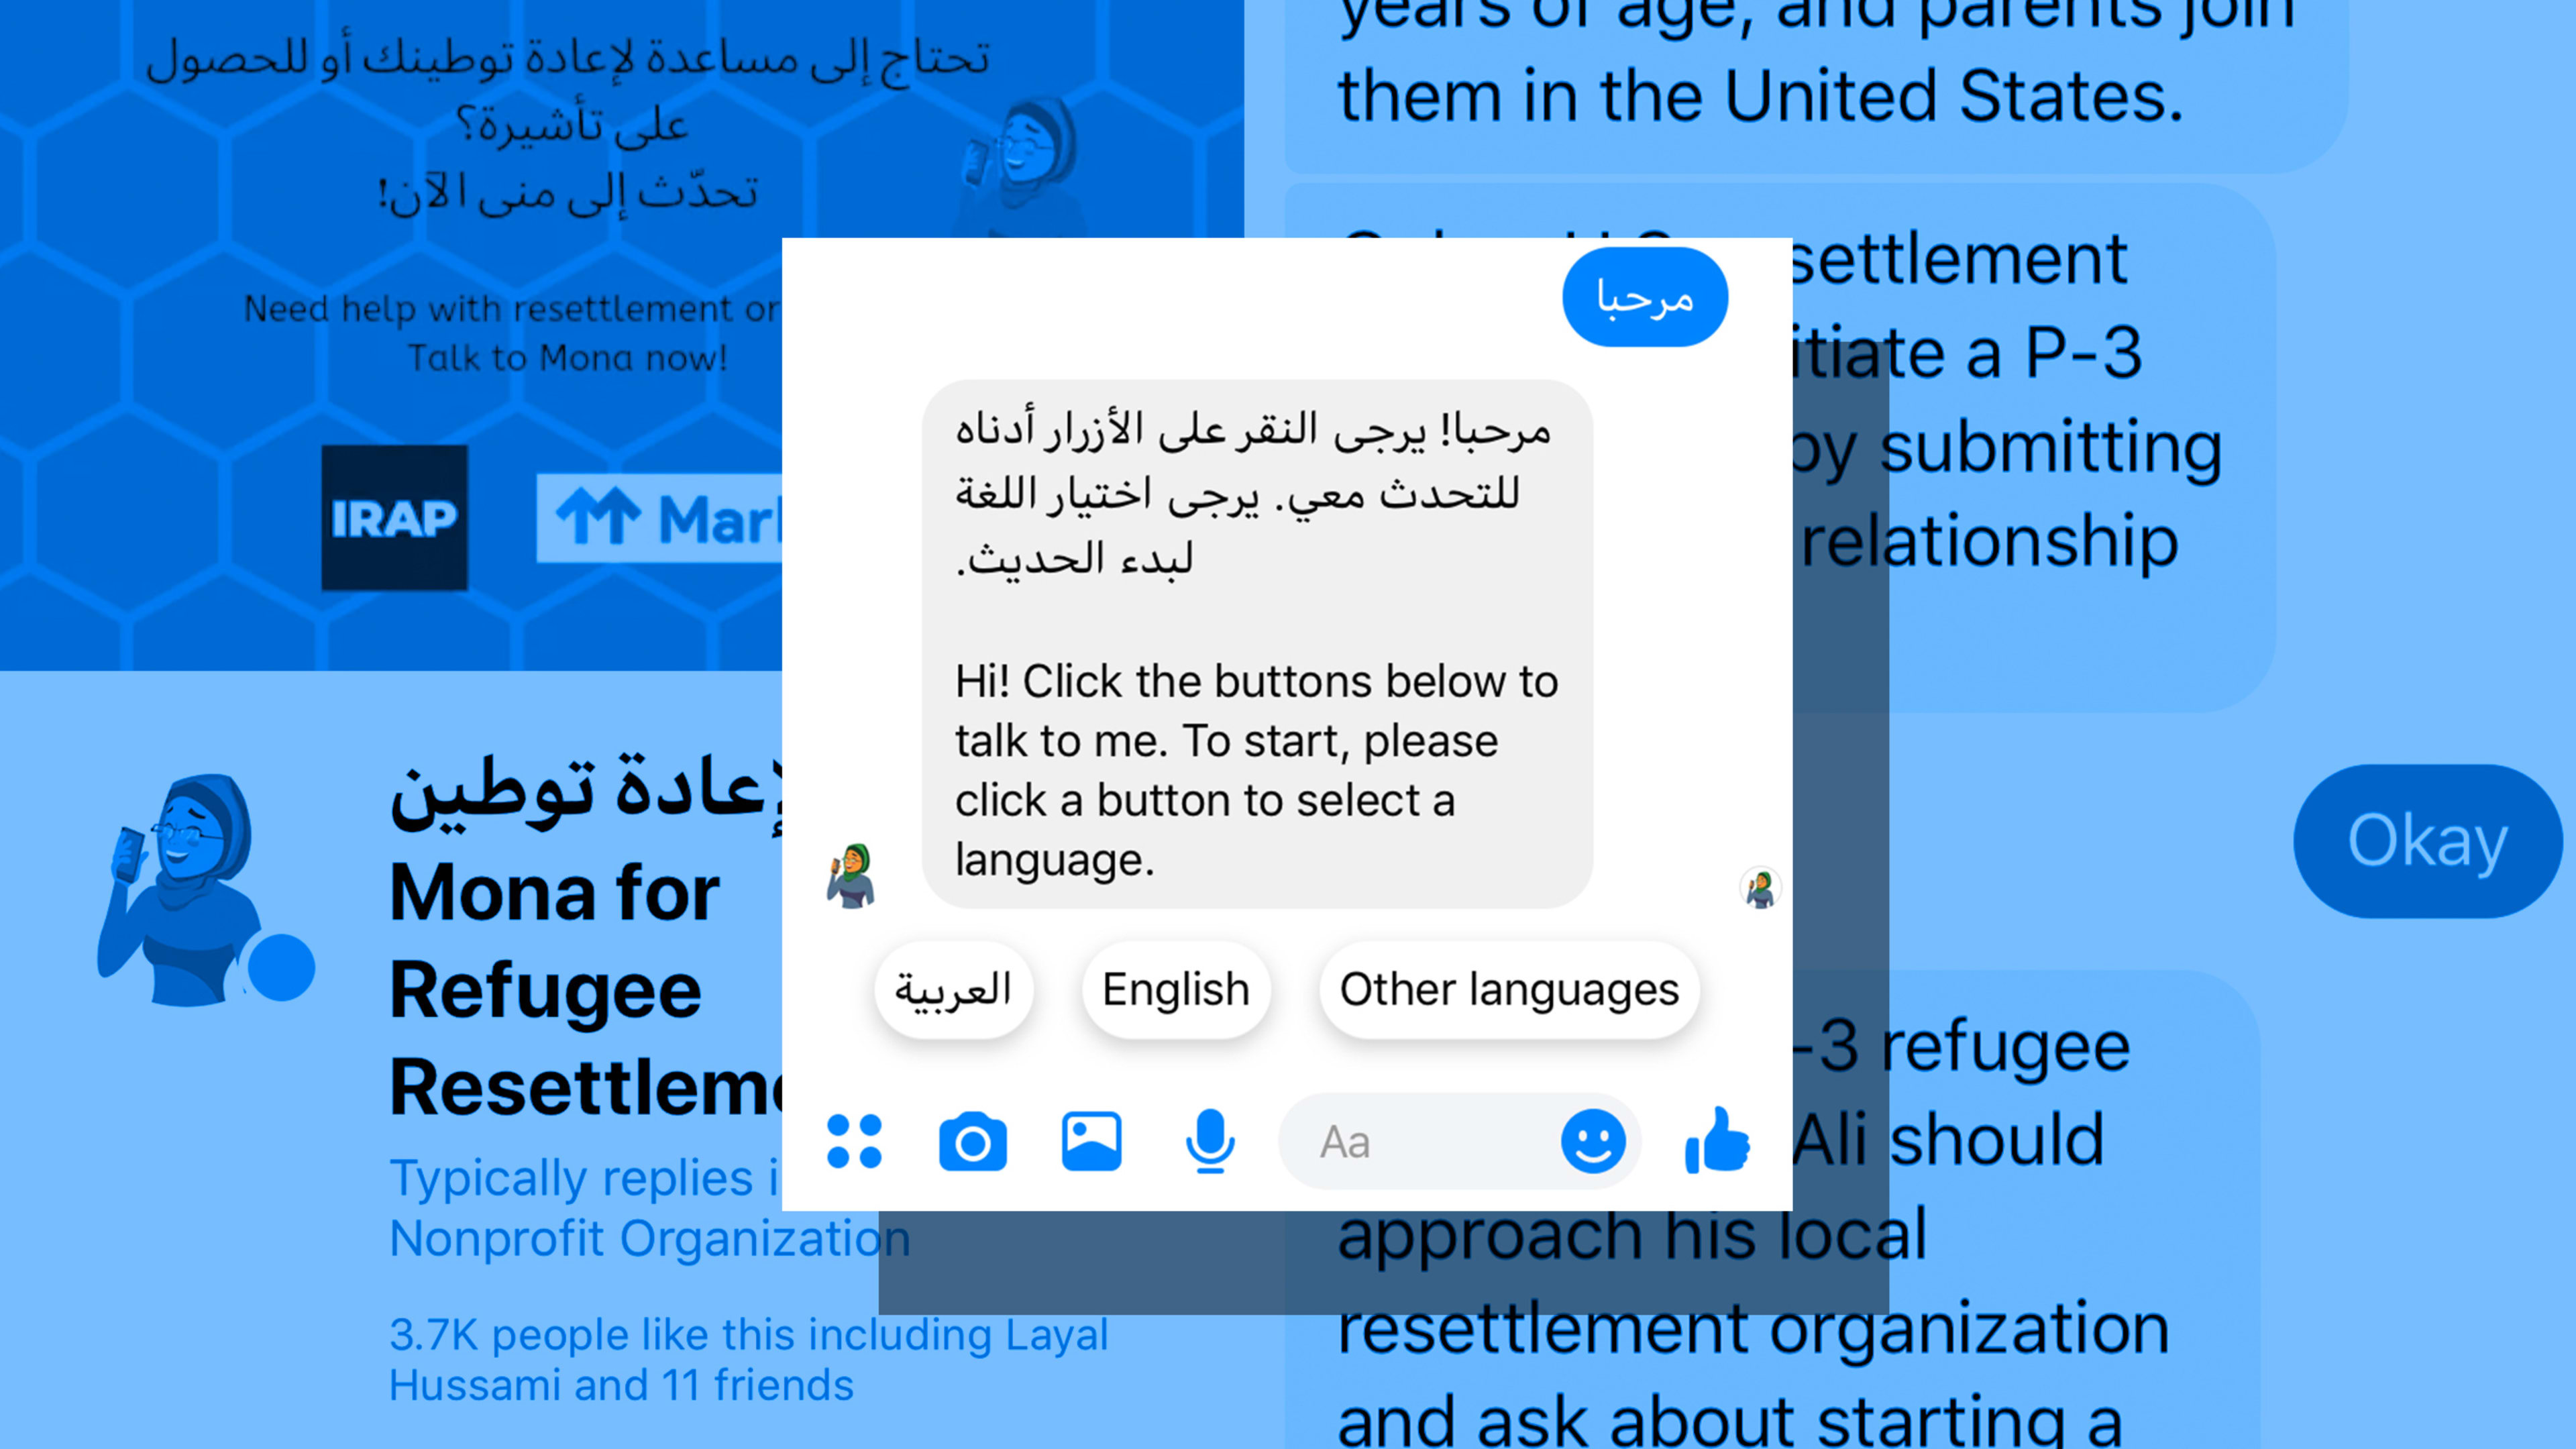 There’s now a chatbot to give refugees instant legal aid